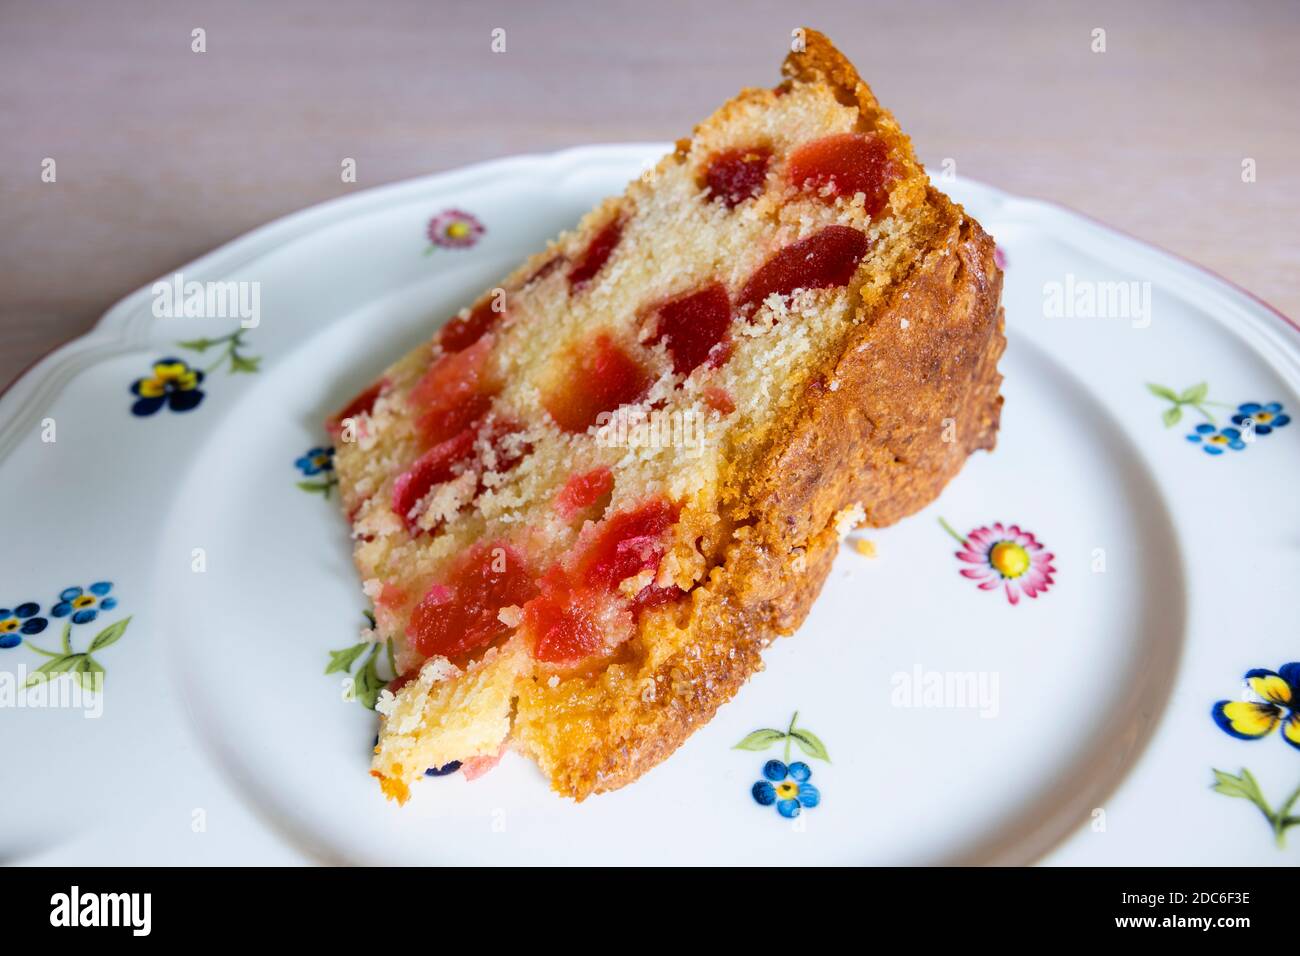 A cut slice of traditional round home-made cherry cake with red glace cherries served on a flowery white plate Stock Photo